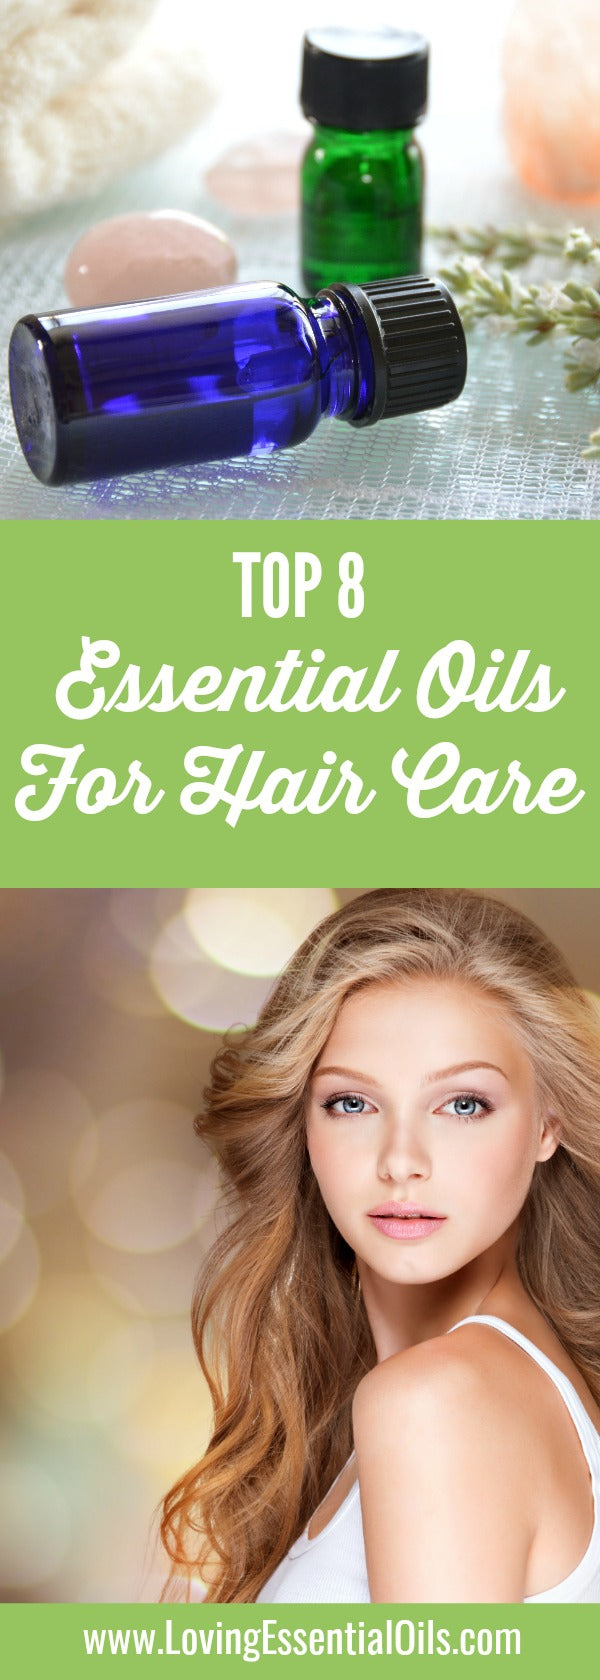 What Essential Oils are Good for Hair Care and Growth? by Loving Essential Oils